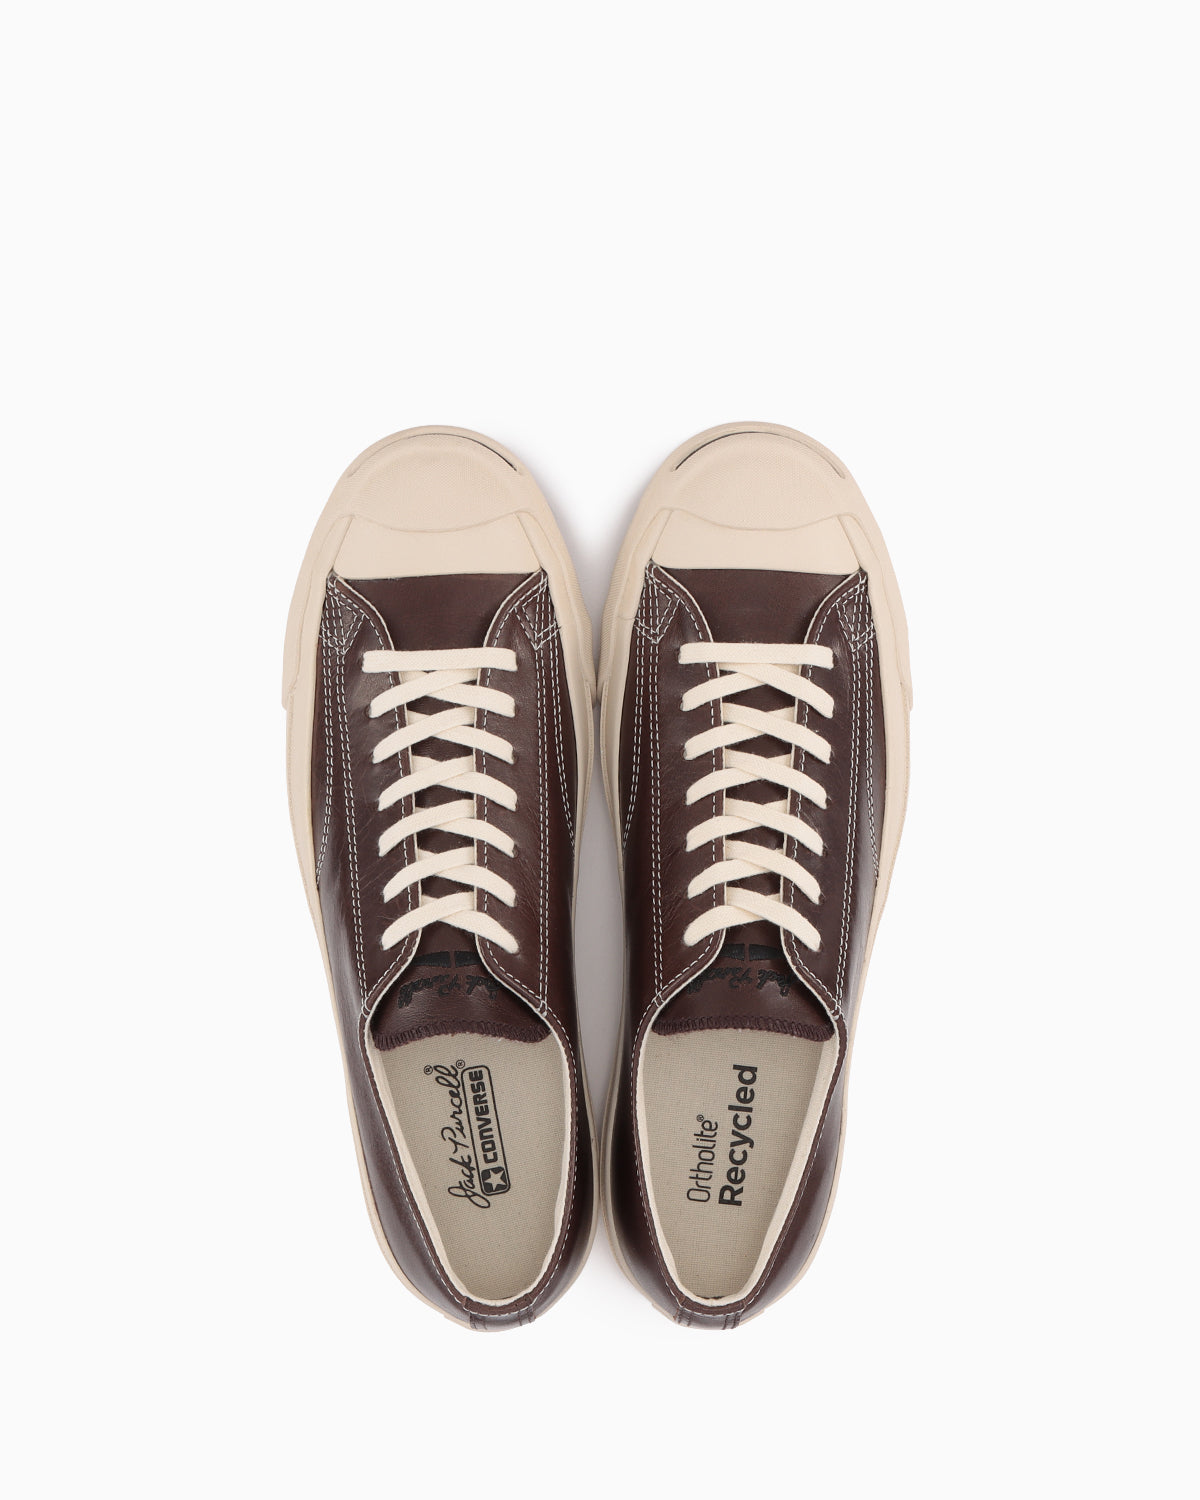 JACK PURCELL OLIVE GREEN LEATHER